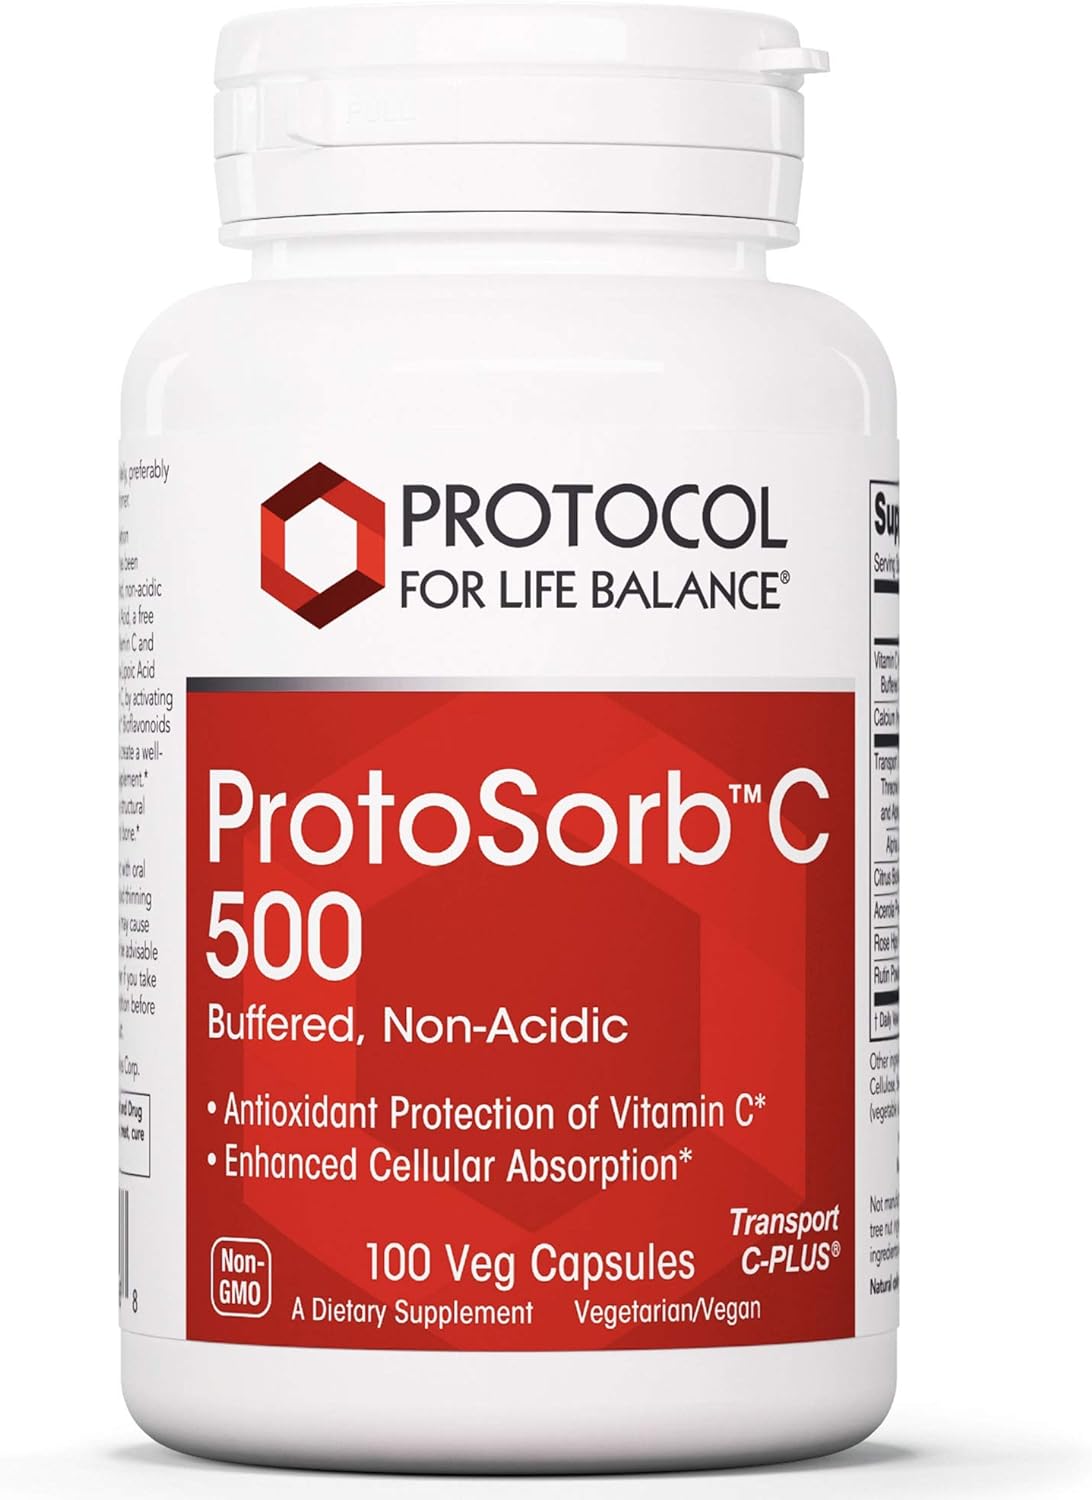 Protocol Protosorb C 500 - Highly Absorbable Vitamin C - for Immune System & Bone Health Supplement* - with Alpha-Lipoic Acid - Buffered, Non-Acidic Vitamin C - 100 Veg Caps